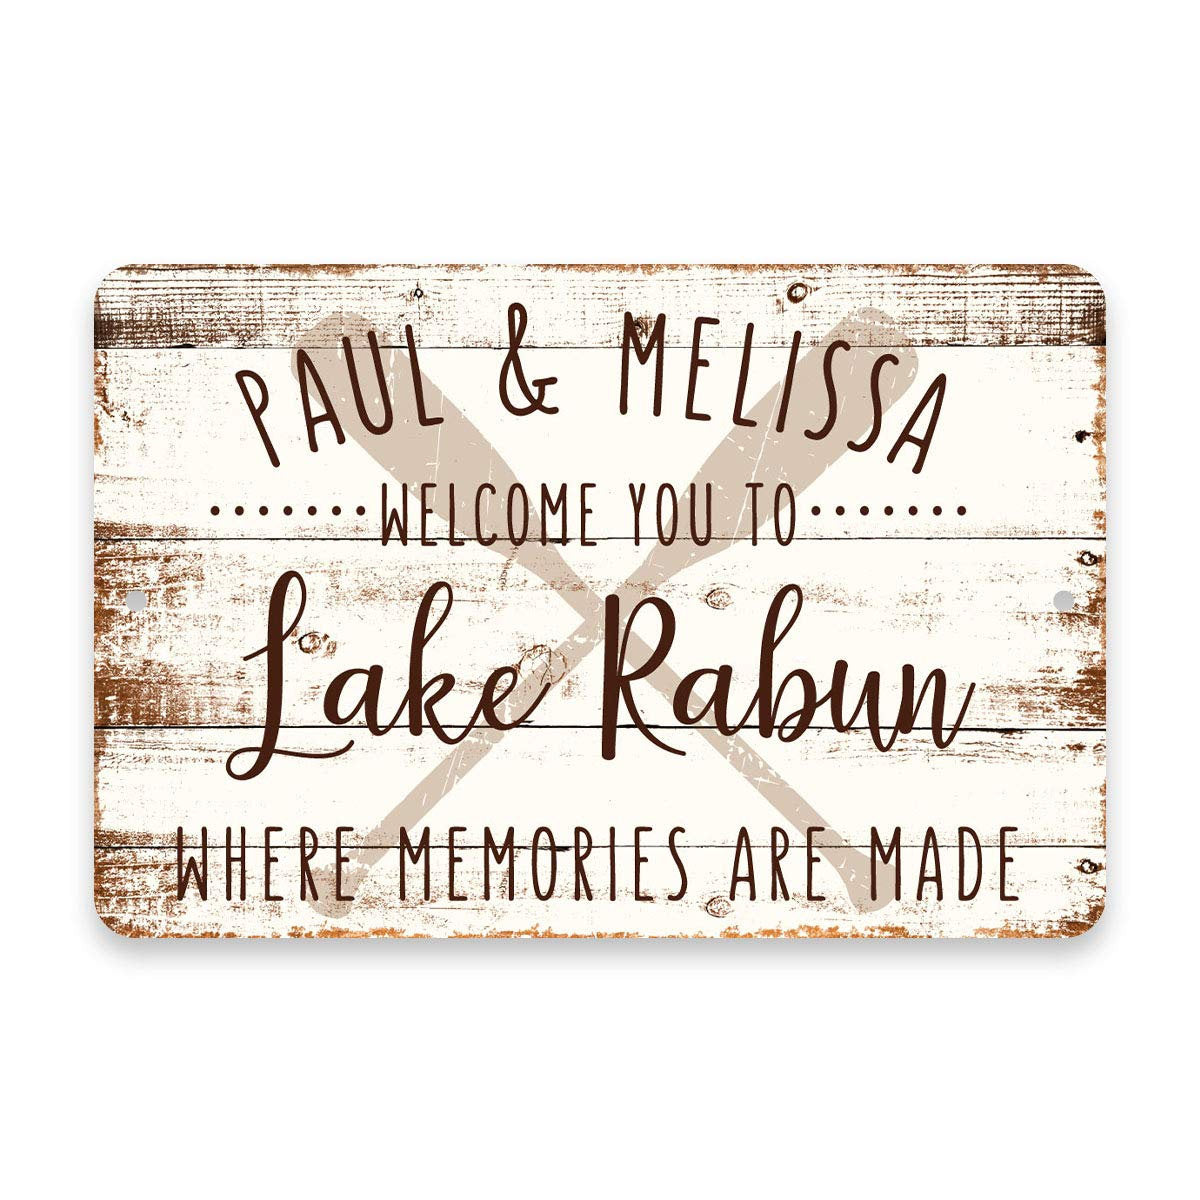 Personalized Welcome to Lake Rabun Where Memories are Made Sign - 8 X 12 Metal Sign with Wood Look